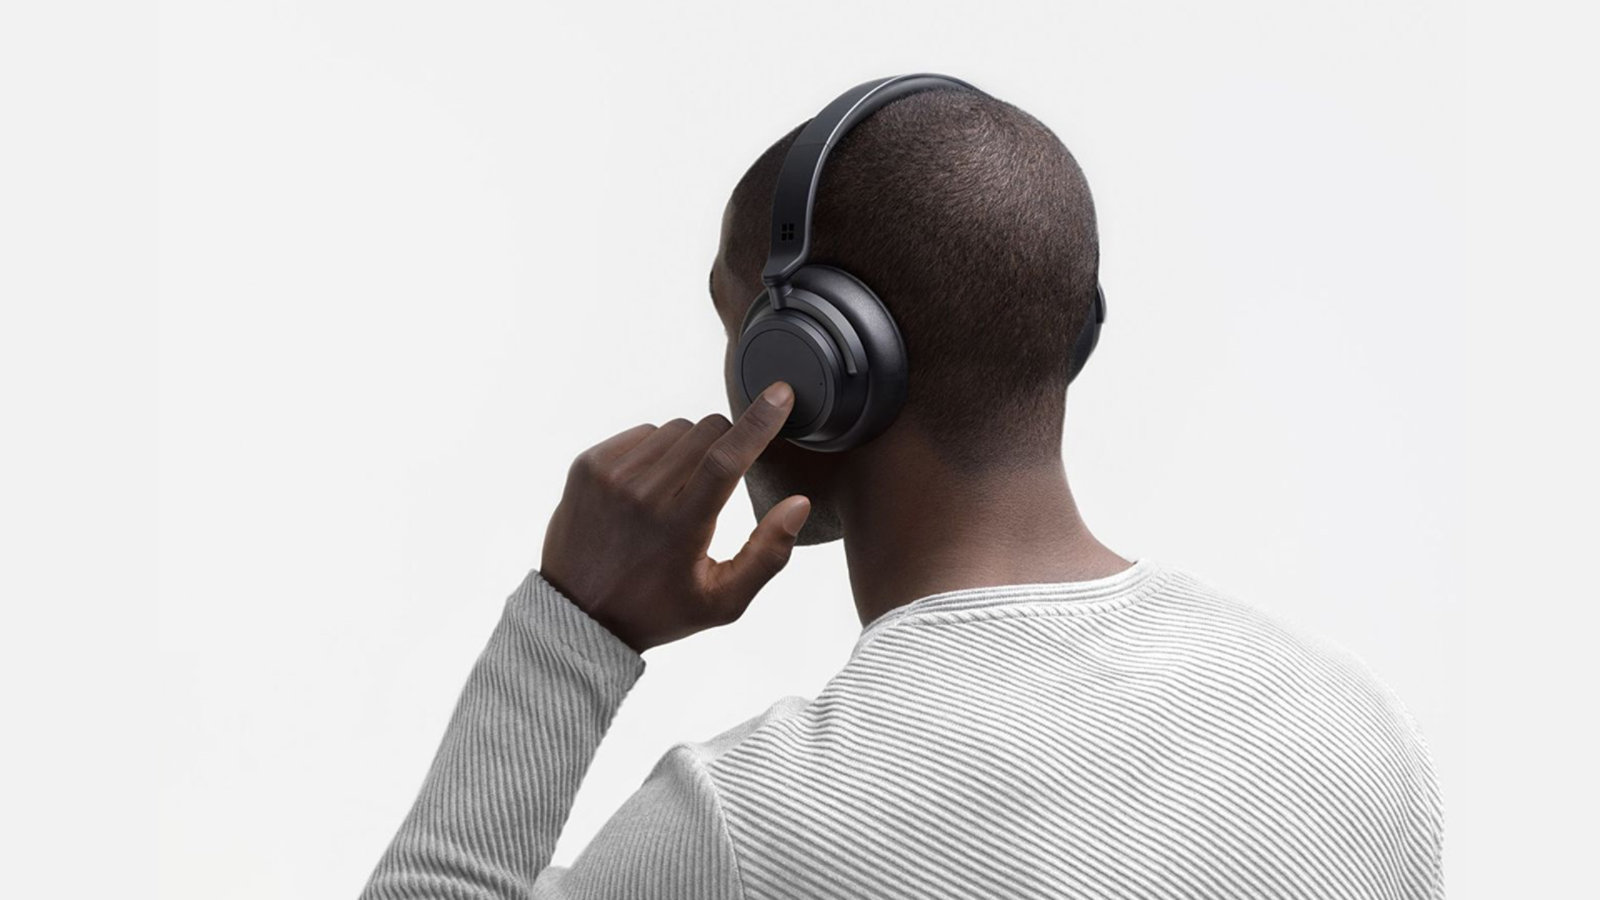 A person wears Surface Headphones 2+ and is shown using touch controls